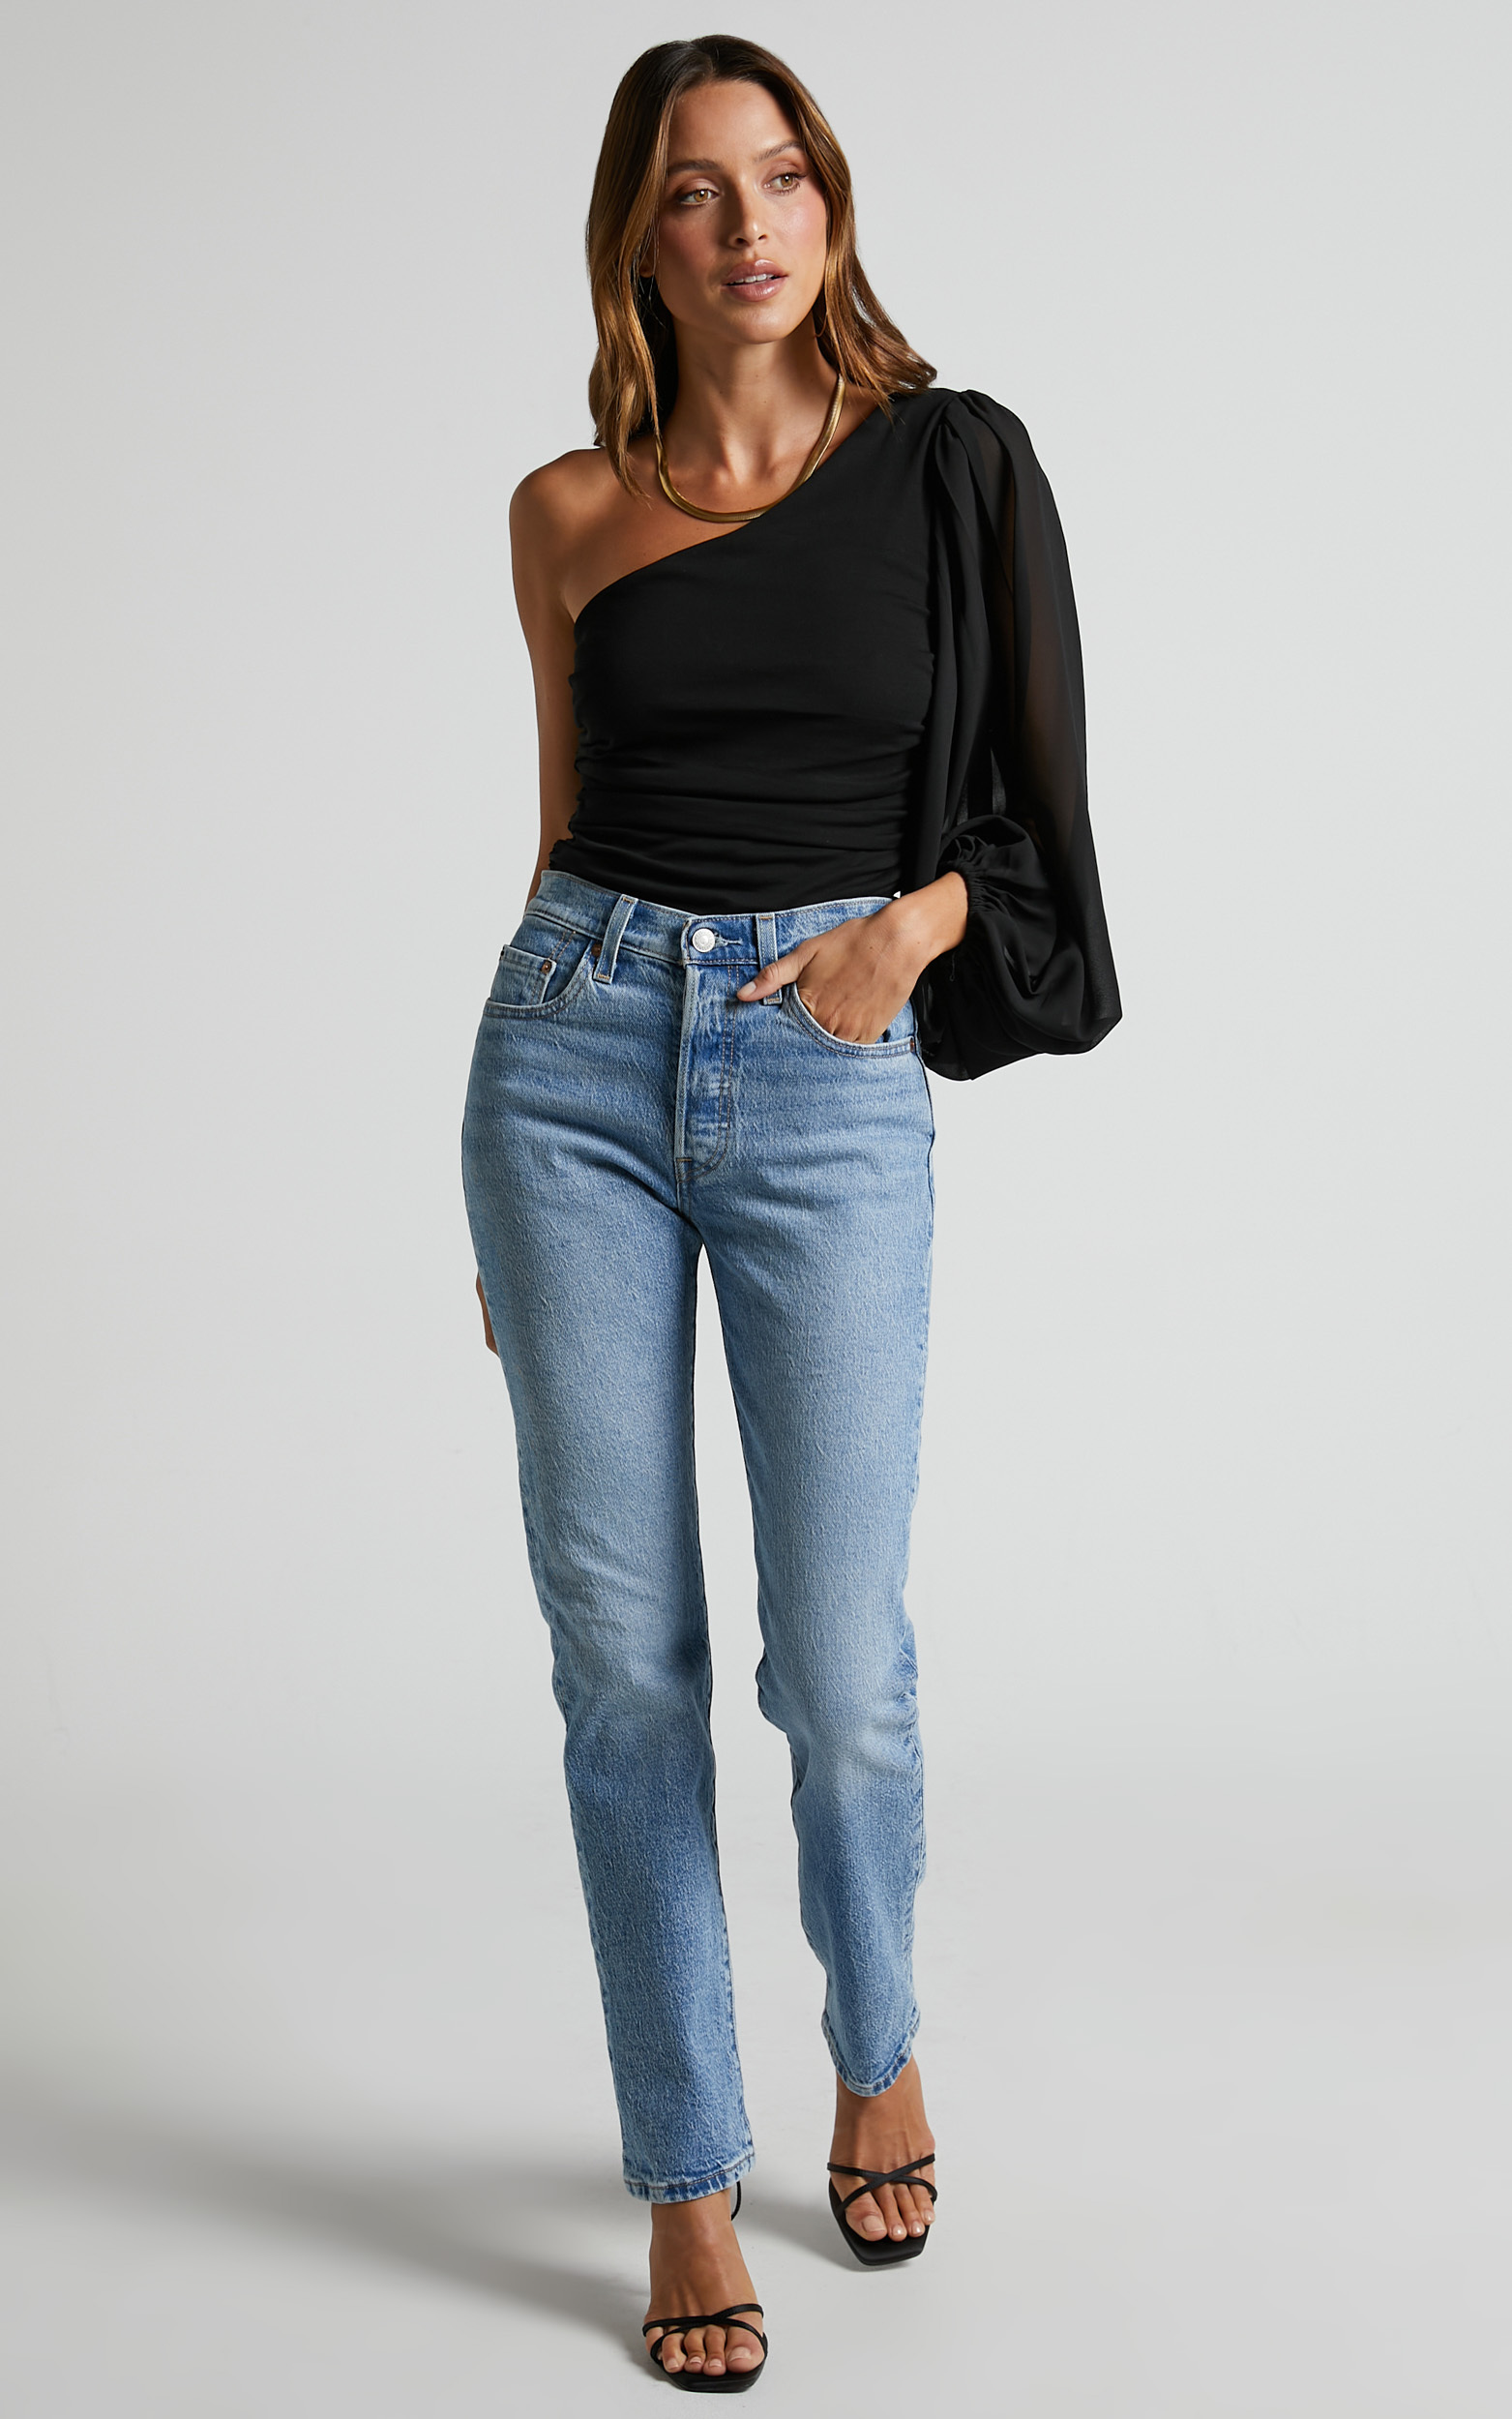 Levi's - Baggy Dad Jeans in Hold My Purse - 06, BLU1, hi-res image number null